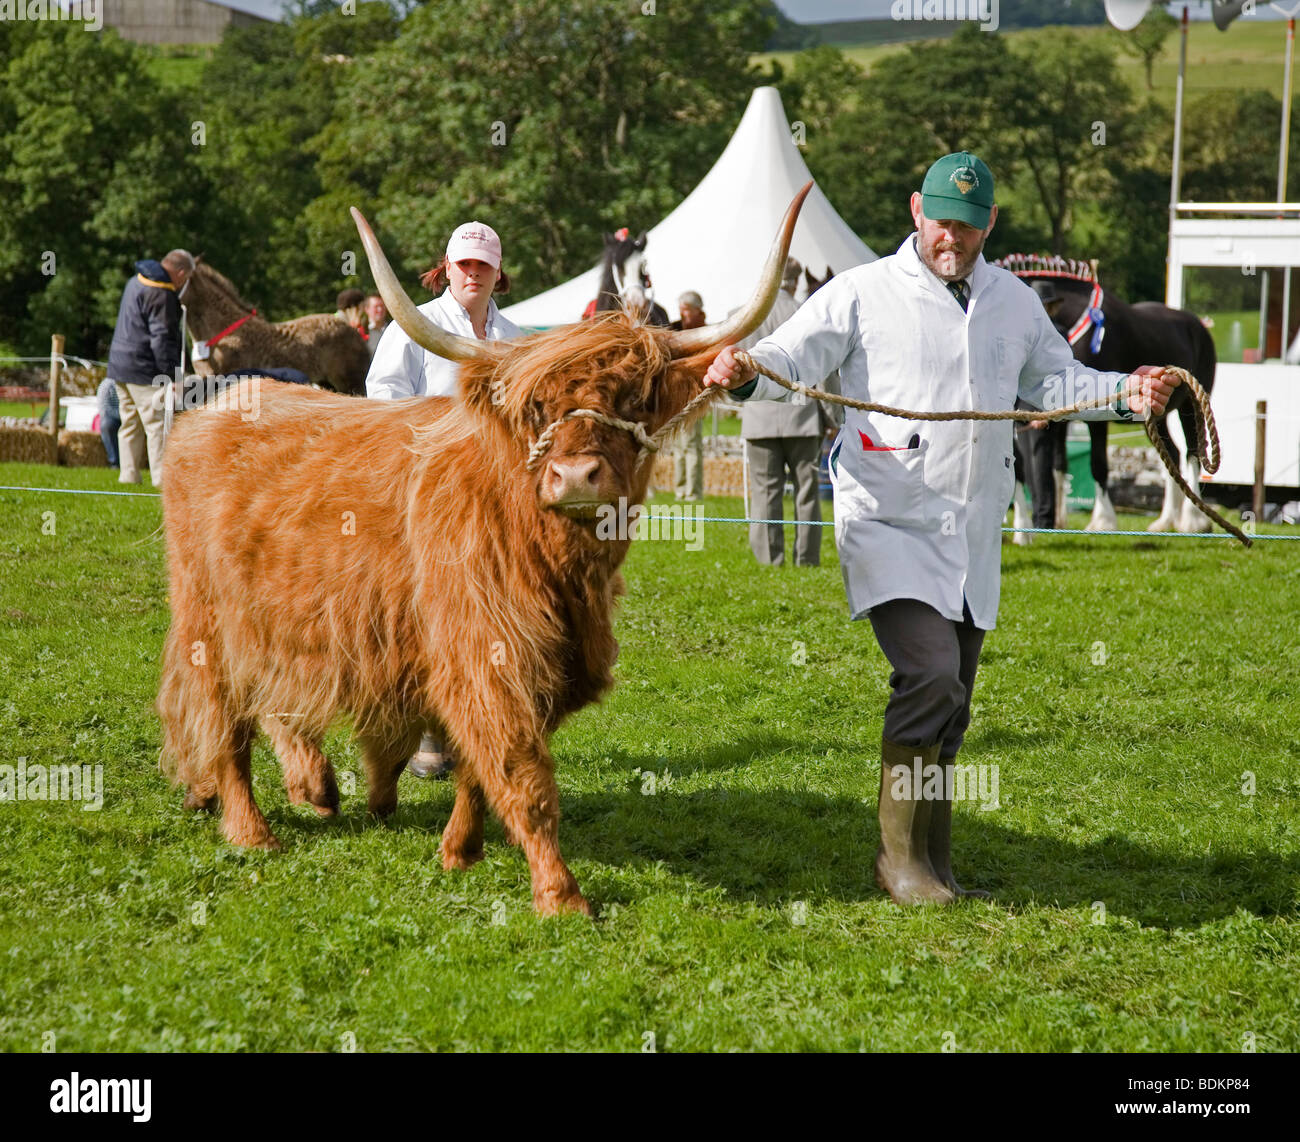 Man leading a Highland Bull around the Show Ring at the Malham Agricultural and Farming Show, Yorkshire Dales, UK Stock Photo